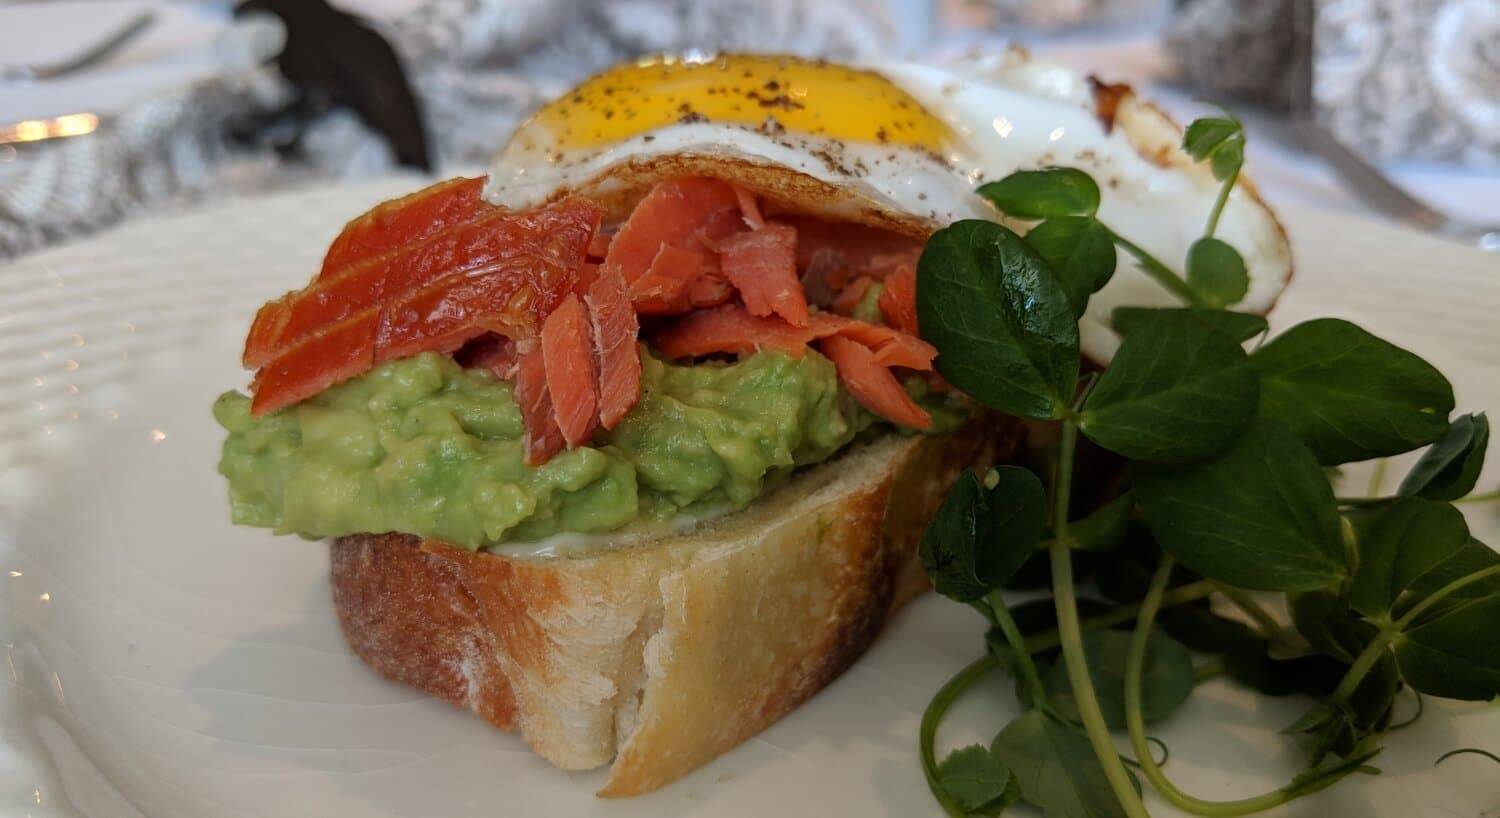 A thick piece of bread covered with mashed avocado, slices of smoked salmon, and topped with a sunny side ug egg, garnished with fresh herbs on the side.